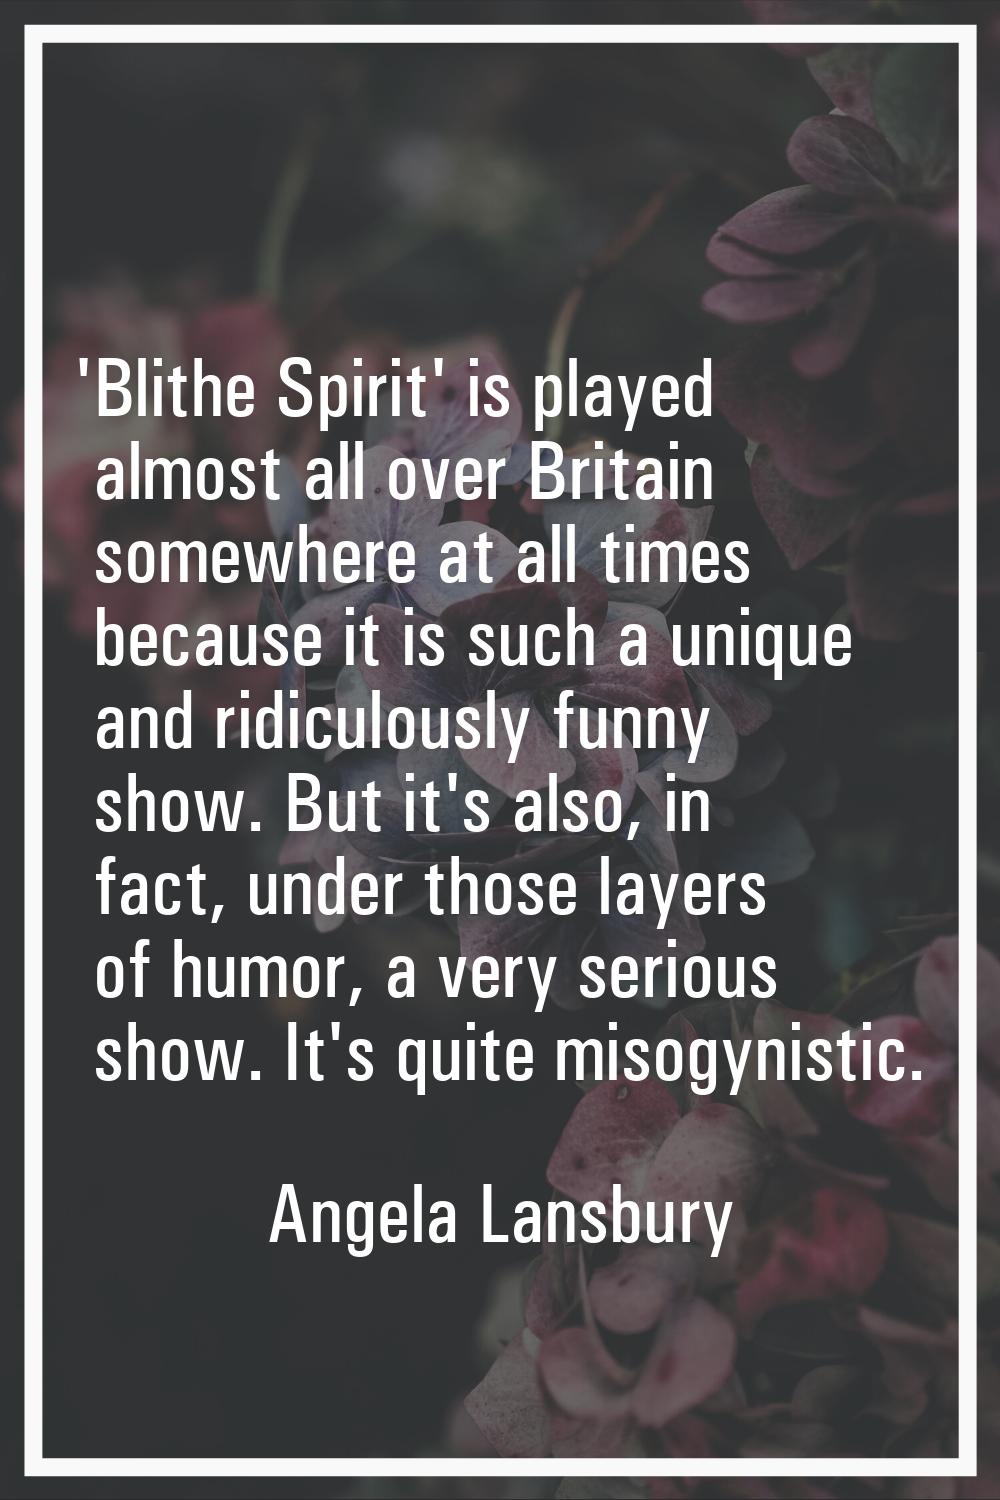 'Blithe Spirit' is played almost all over Britain somewhere at all times because it is such a uniqu